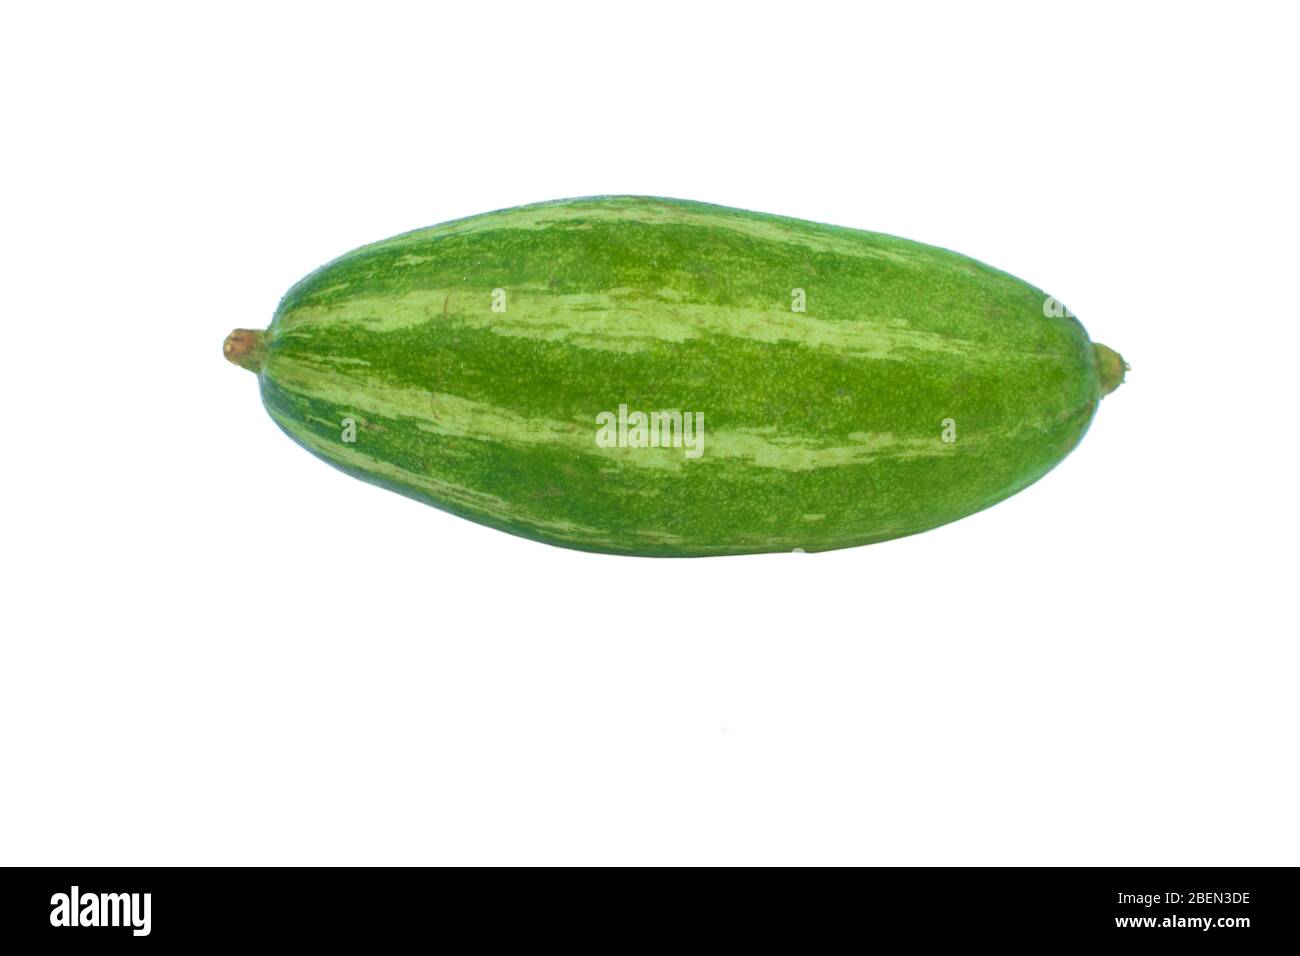 Single fresh green colored pointed gourd isolated on an empty white background Stock Photo